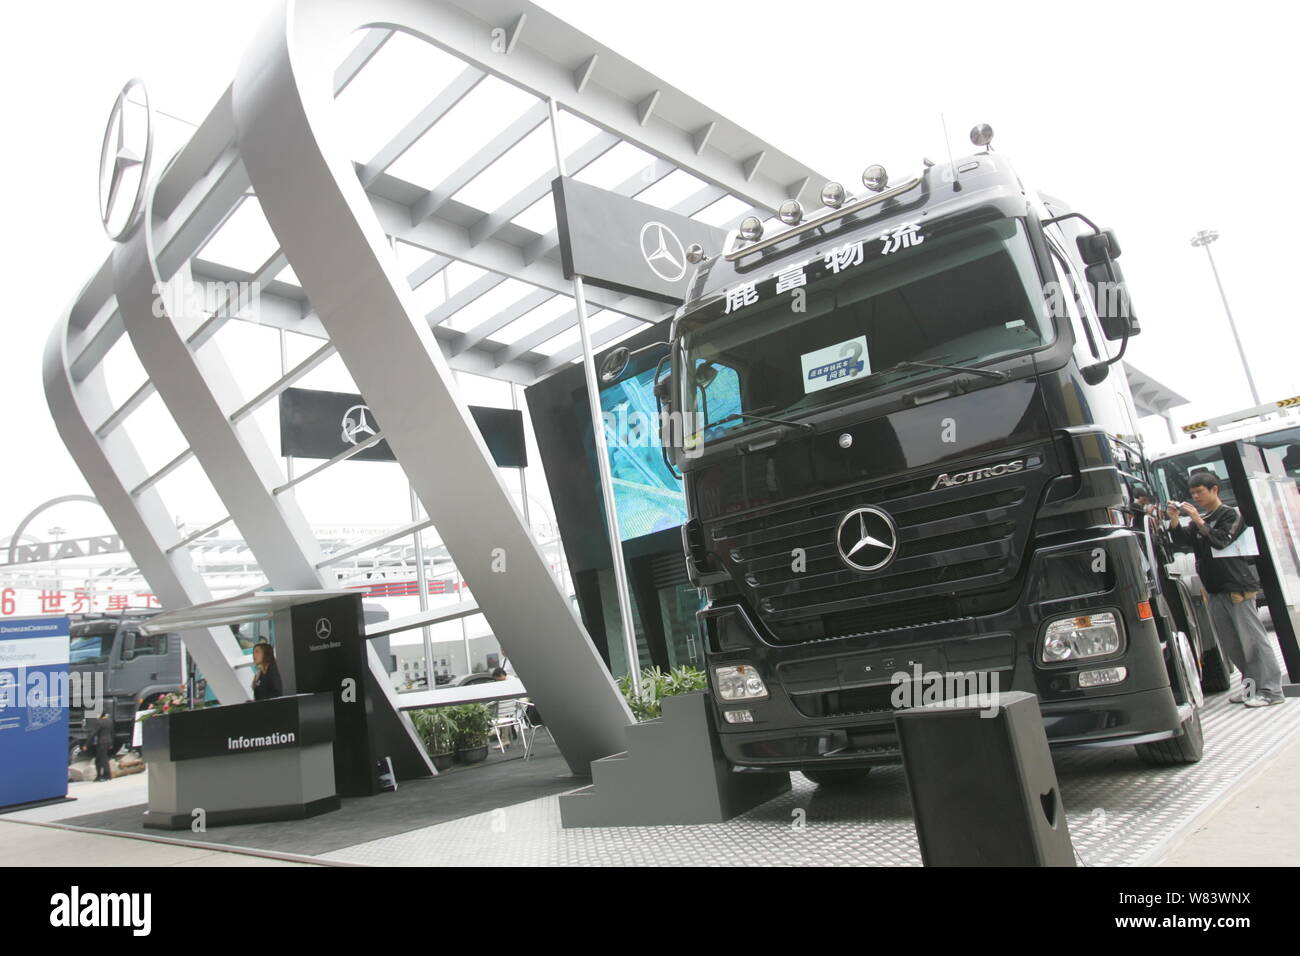 --FILE--A Mercedes-Benz Actros heavy truck of Daimler is on display during the 12th Shanghai International Automobile Industry Exhibition, also known Stock Photo